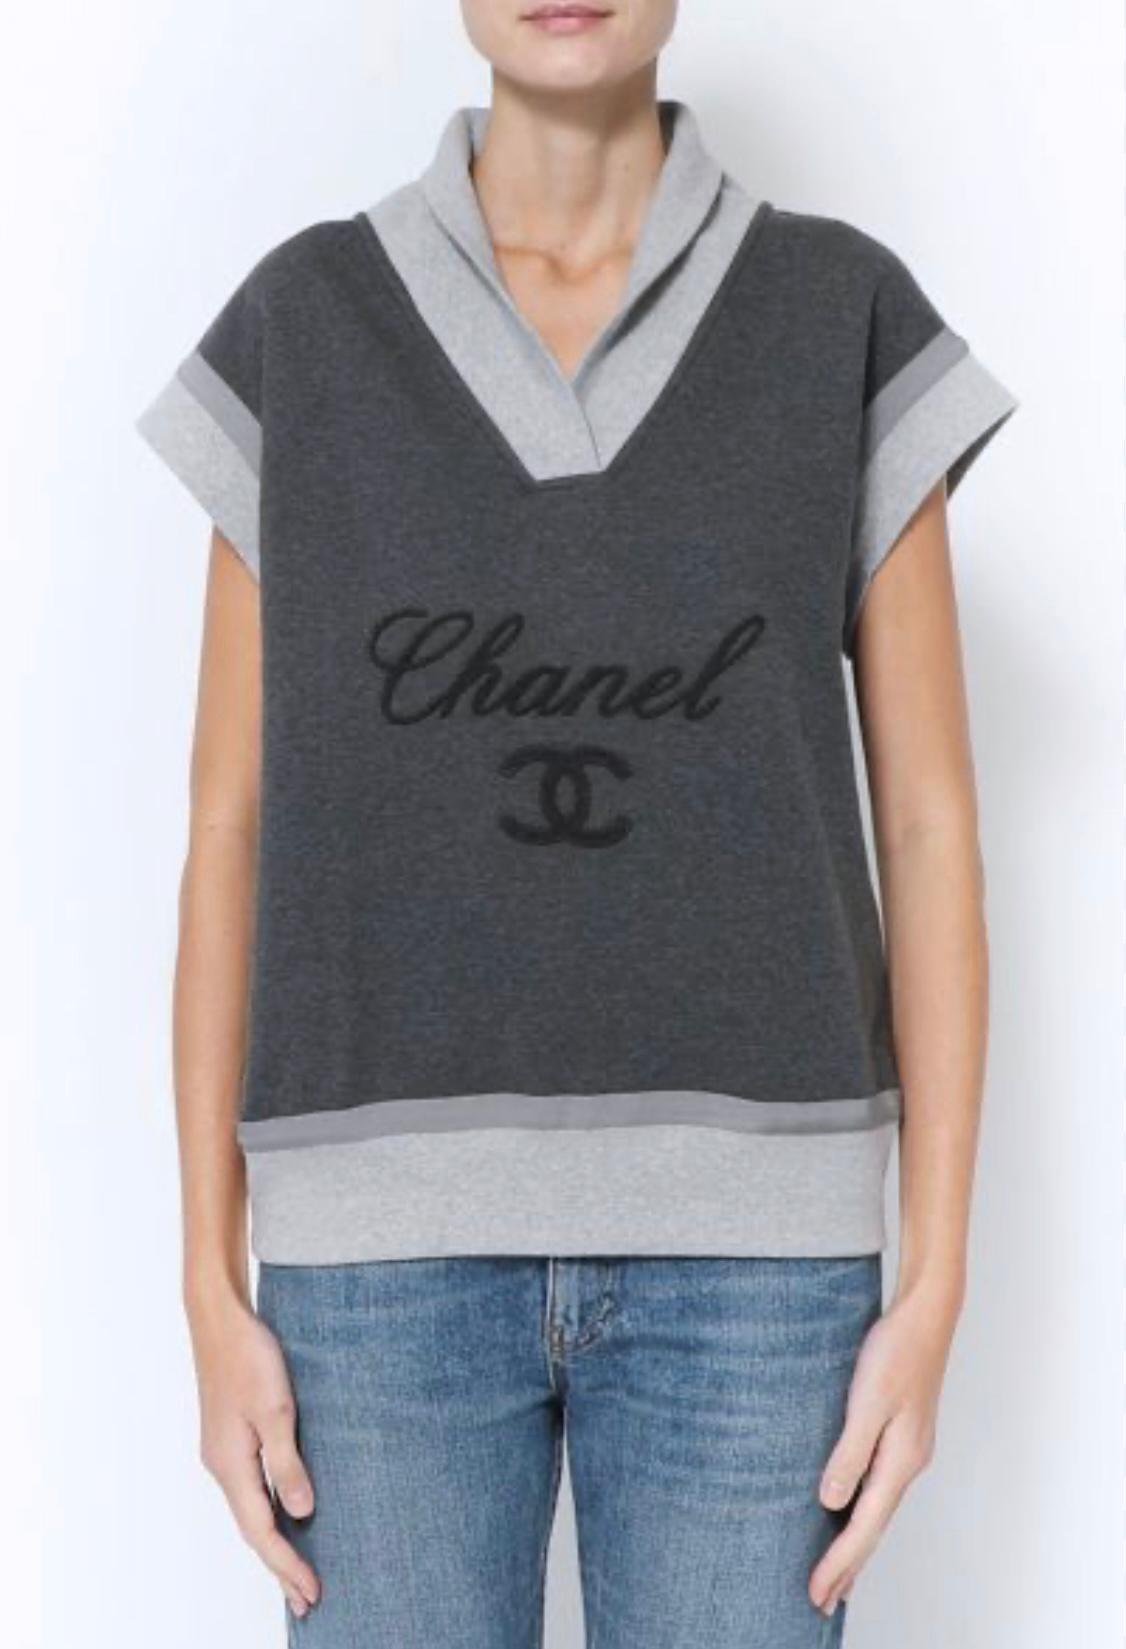 New Chanel super stylish grey vest with CC 'Chanel' logo at front
Size mark 36 FR. Never worn.